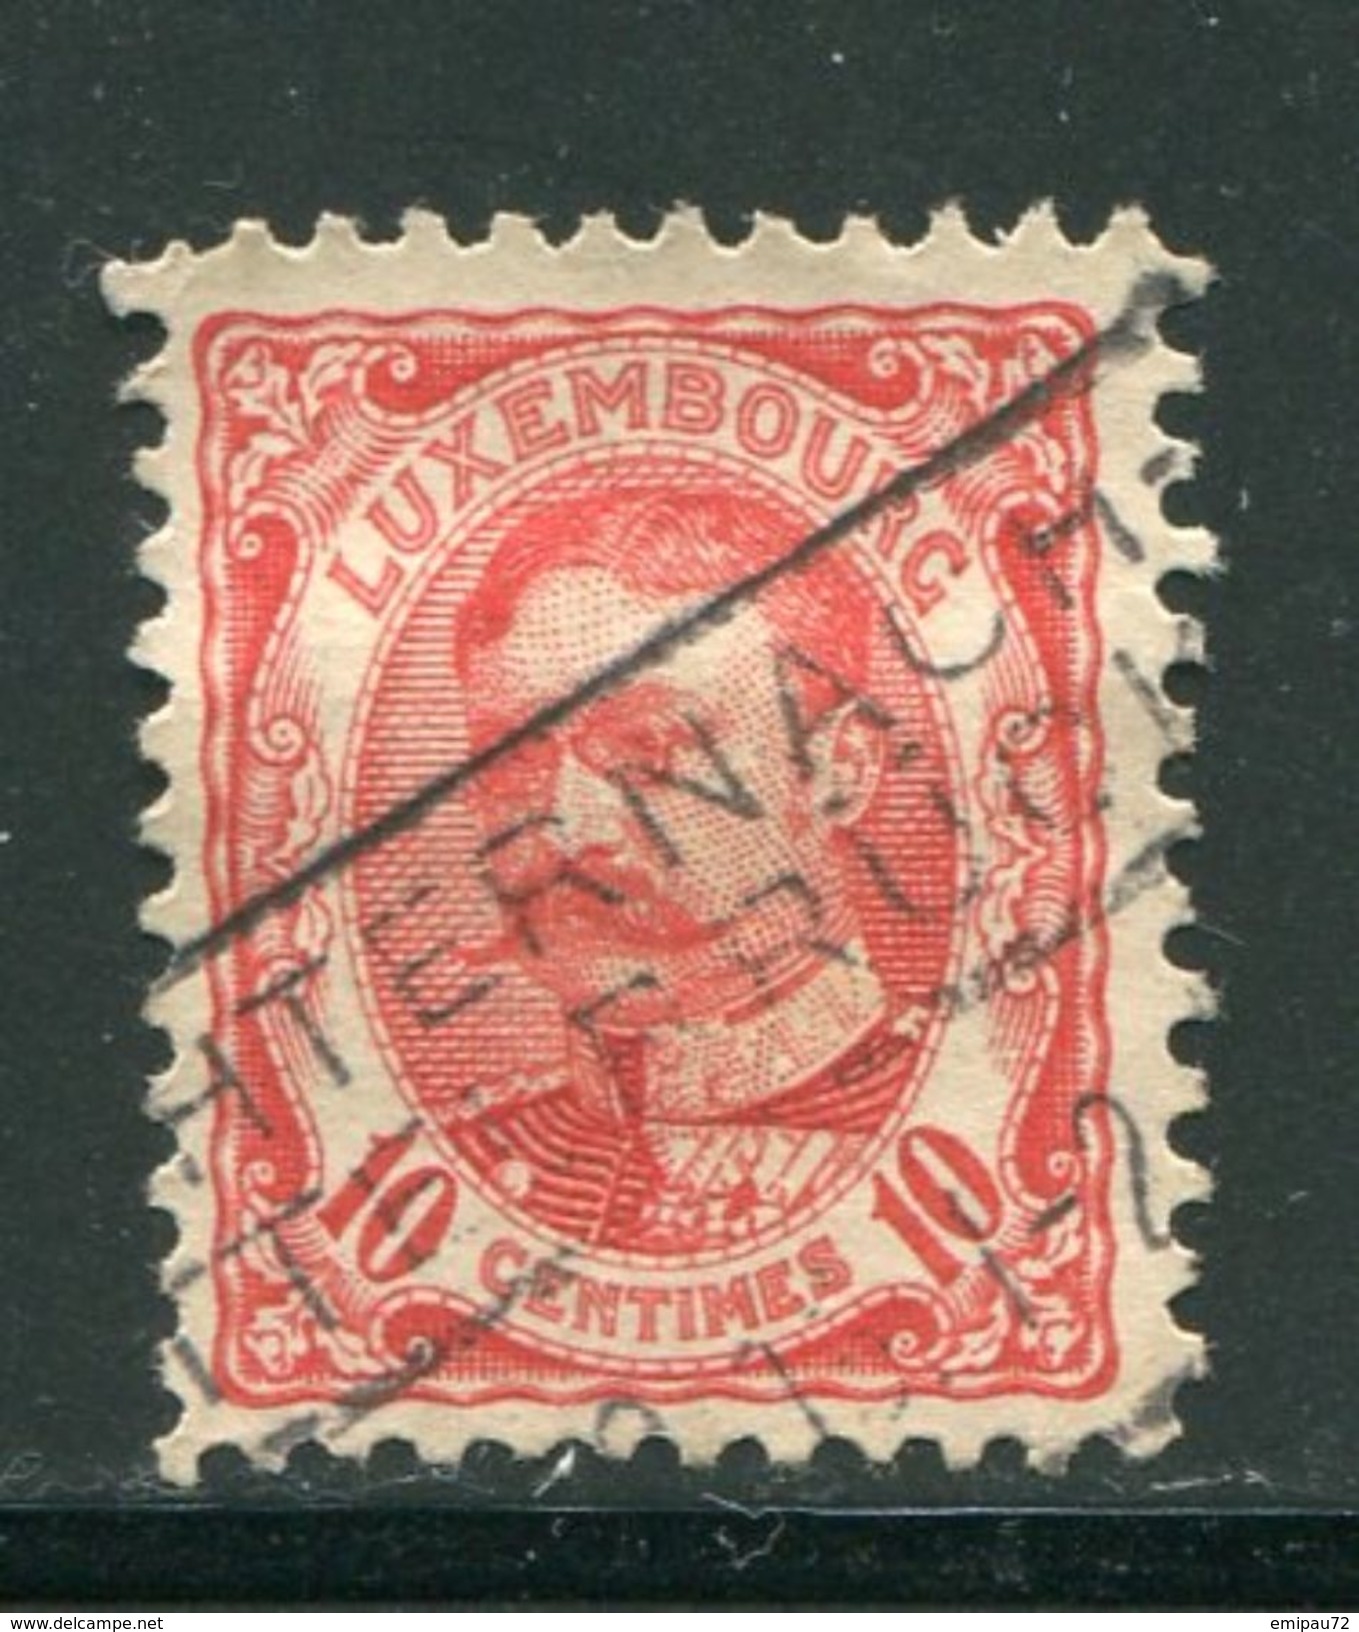 LUXEMBOURG- Y&T N°74- Oblitéré - 1906 Guillermo IV